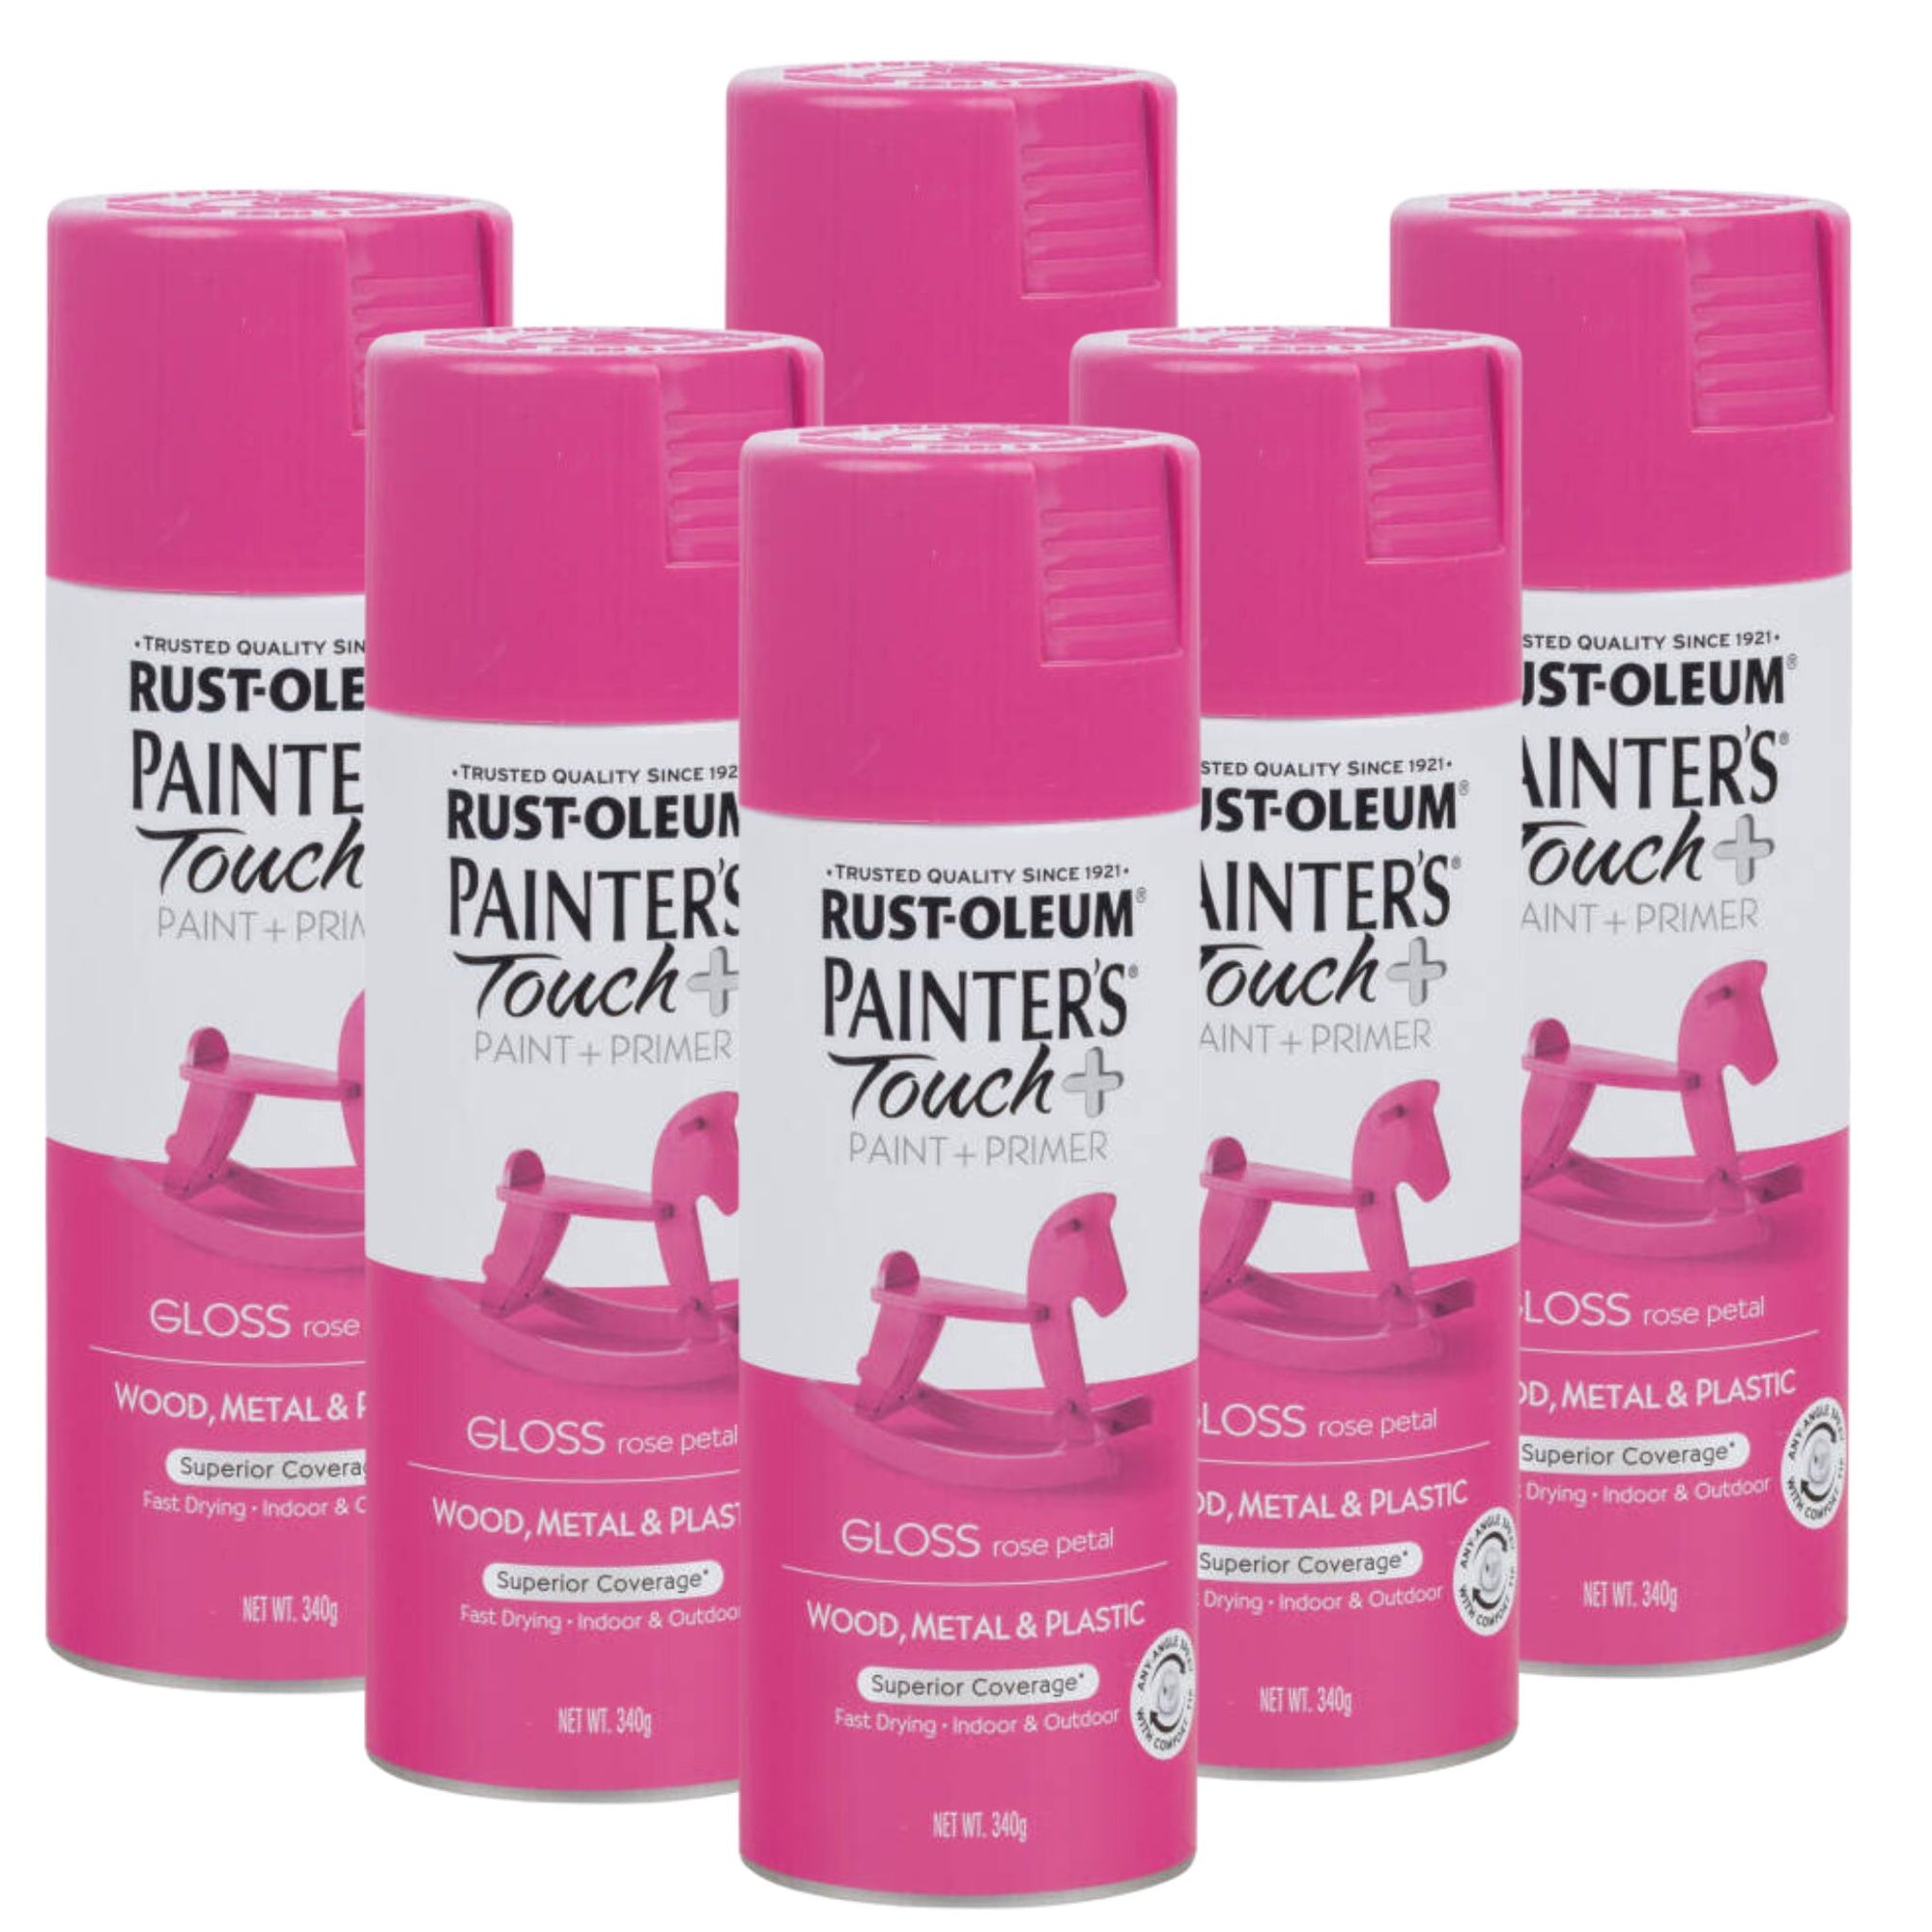 Rust-Oleum PAINTER'S TOUCH PLUS Painter’s Touch Plus Spray | GLOSS ROSE PETAL (6 CANS) - South East Clearance Centre